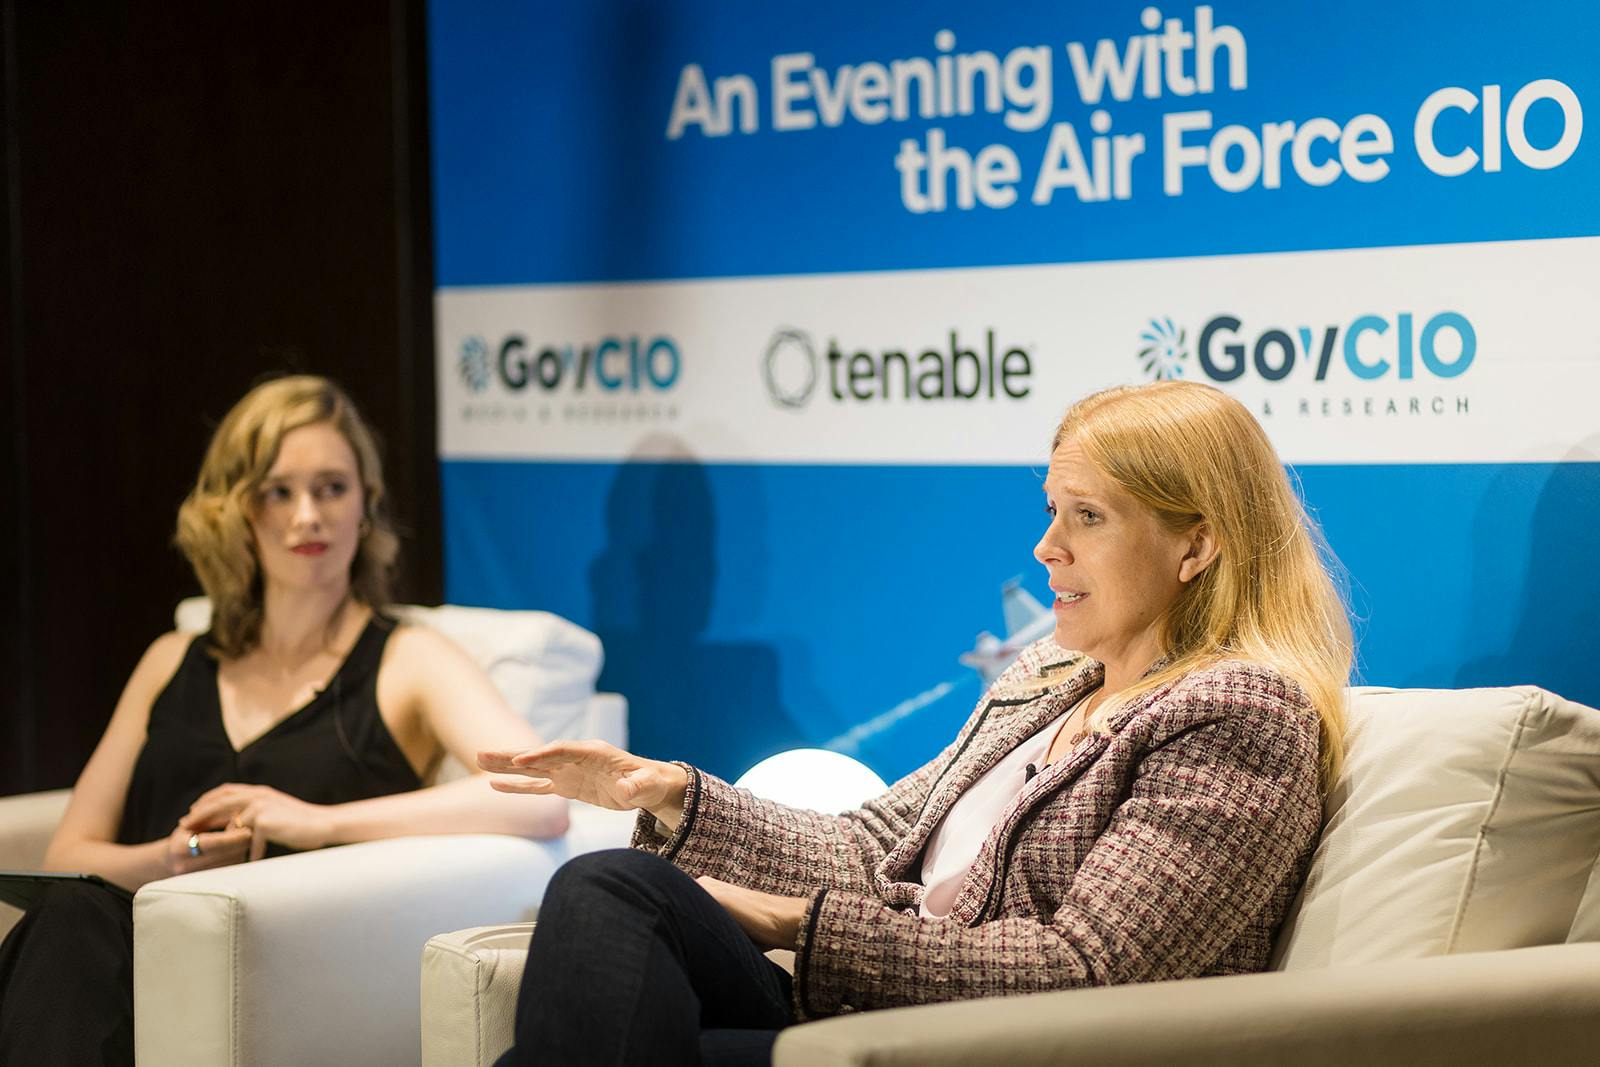 An Evening with the Air Force CIO